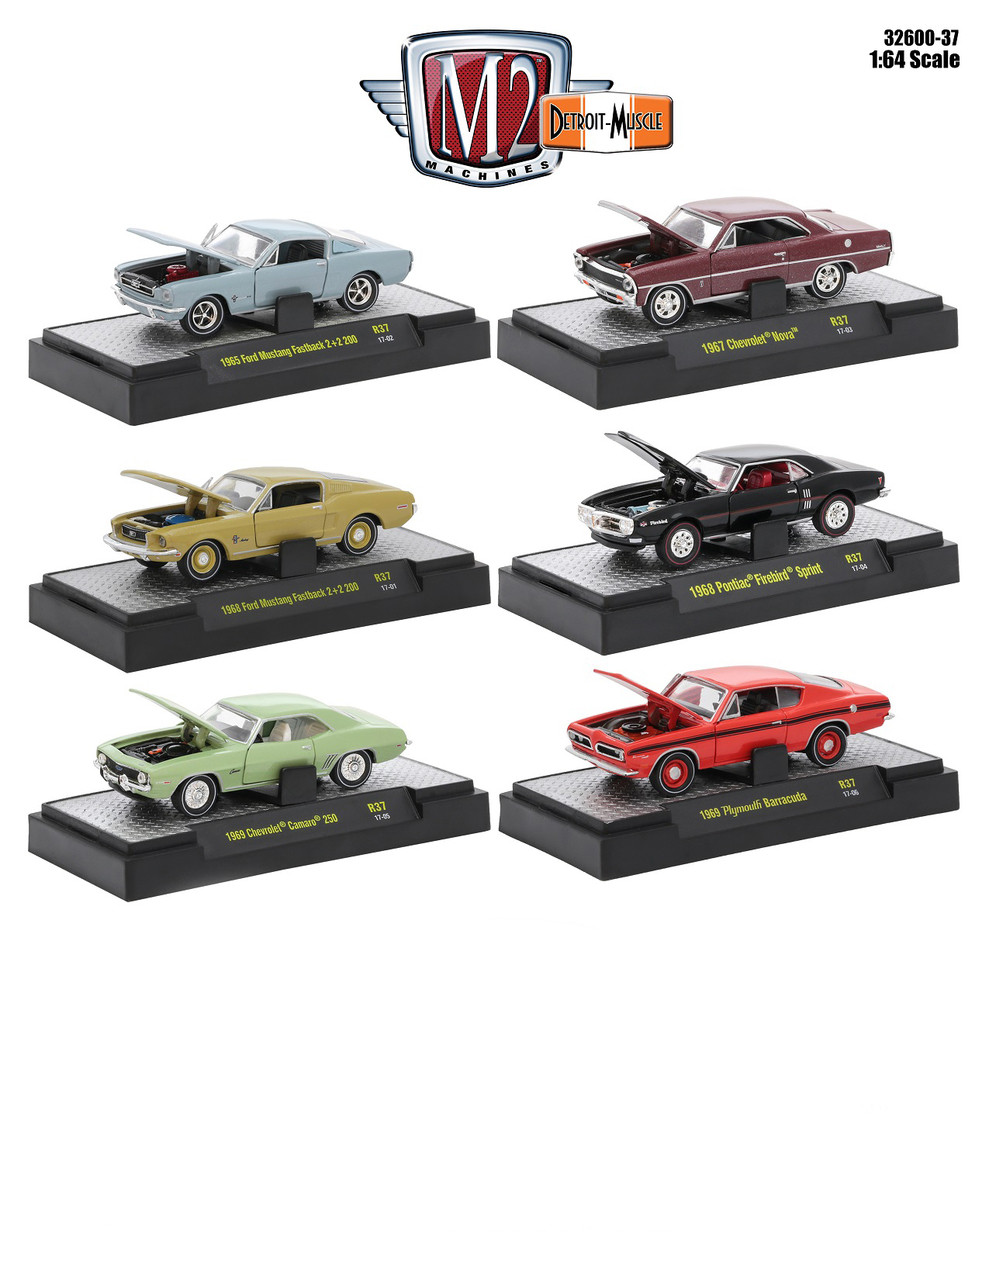 Release 45 New M2 Machines Detroit Muscle 1:64 Diecast Model Cars